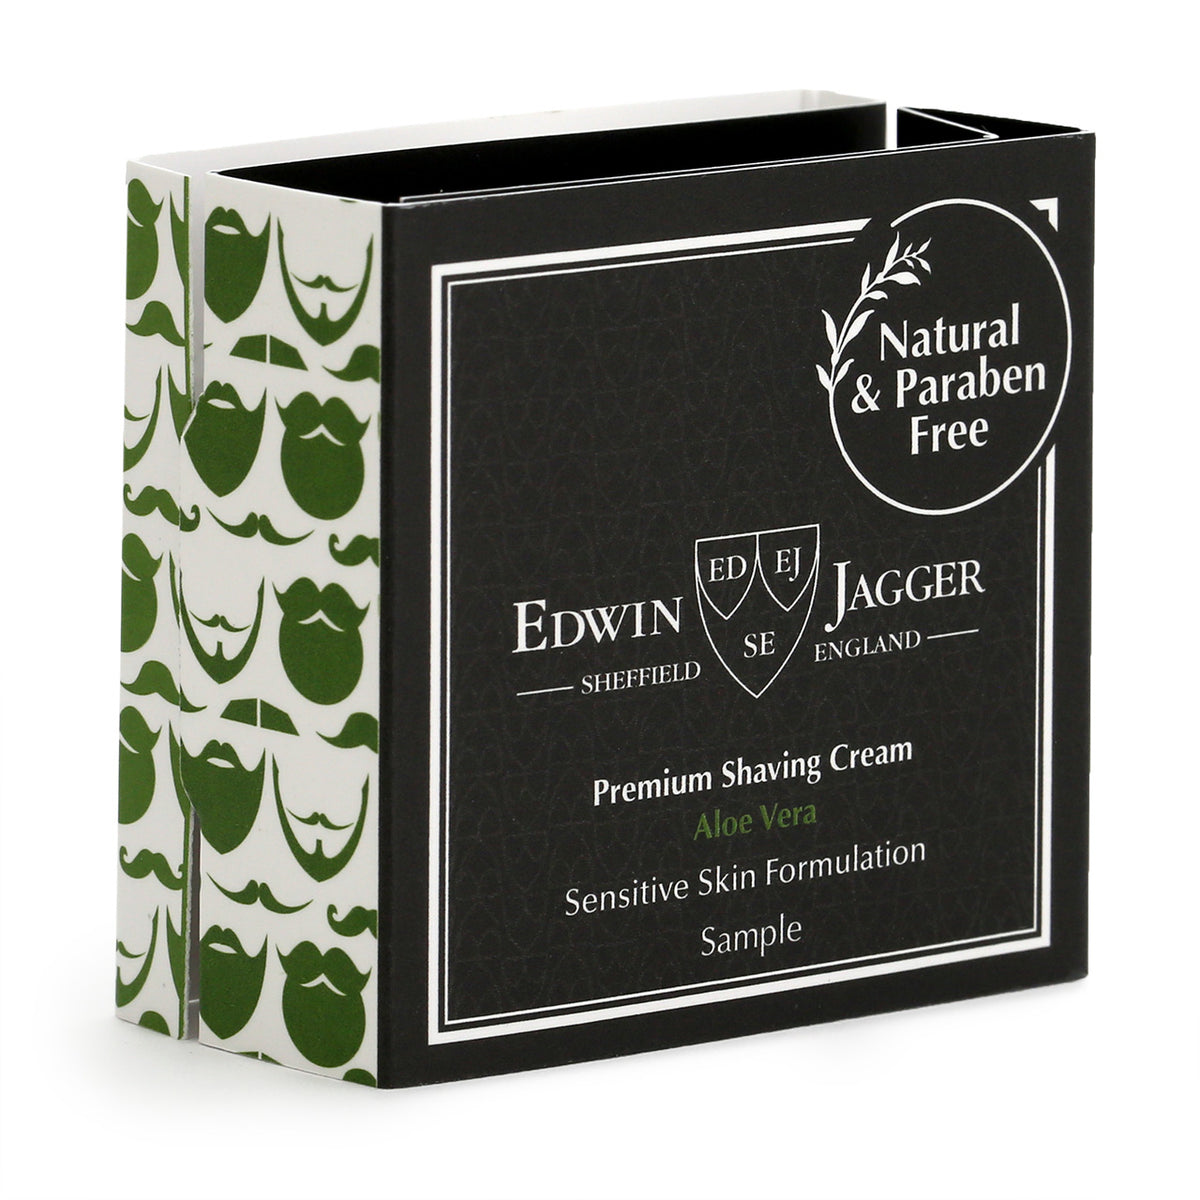 Edwin Jagger sample-sized Shaving Cream and Aftershave Lotion, Aloe Vera